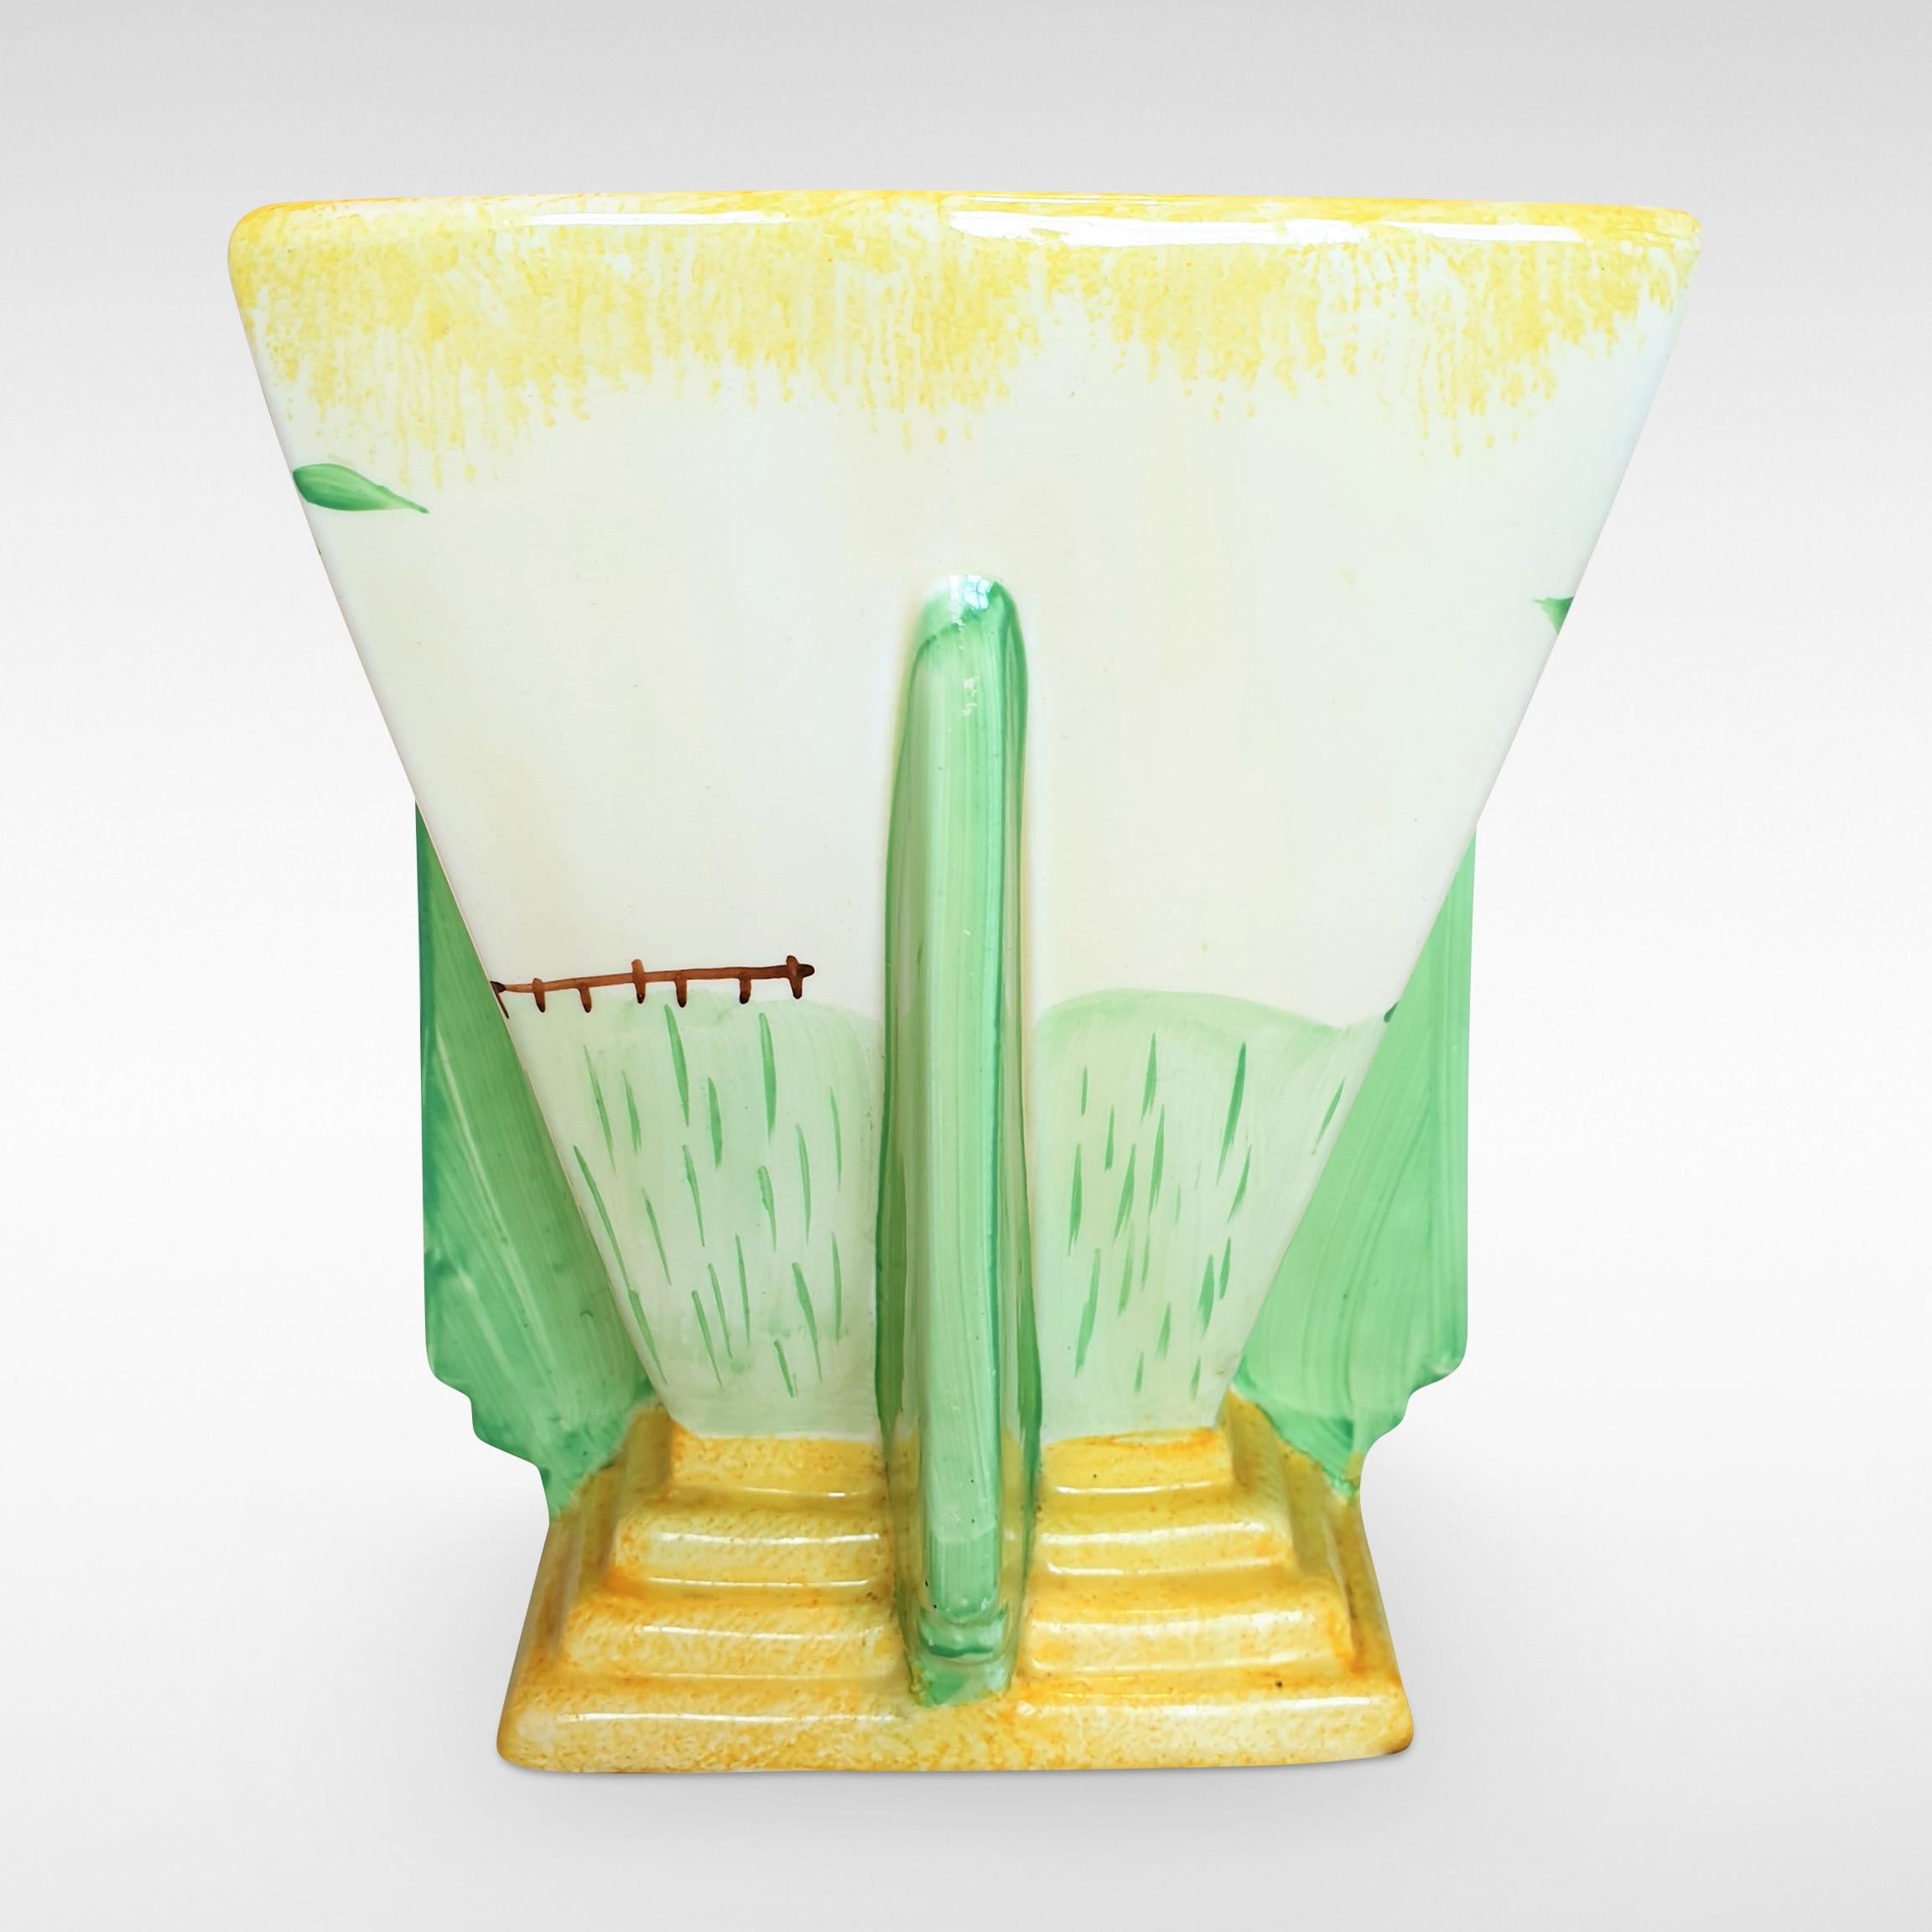 English Art Deco Square Vase by Wade Heath Attributed to Jessie Hallen For Sale